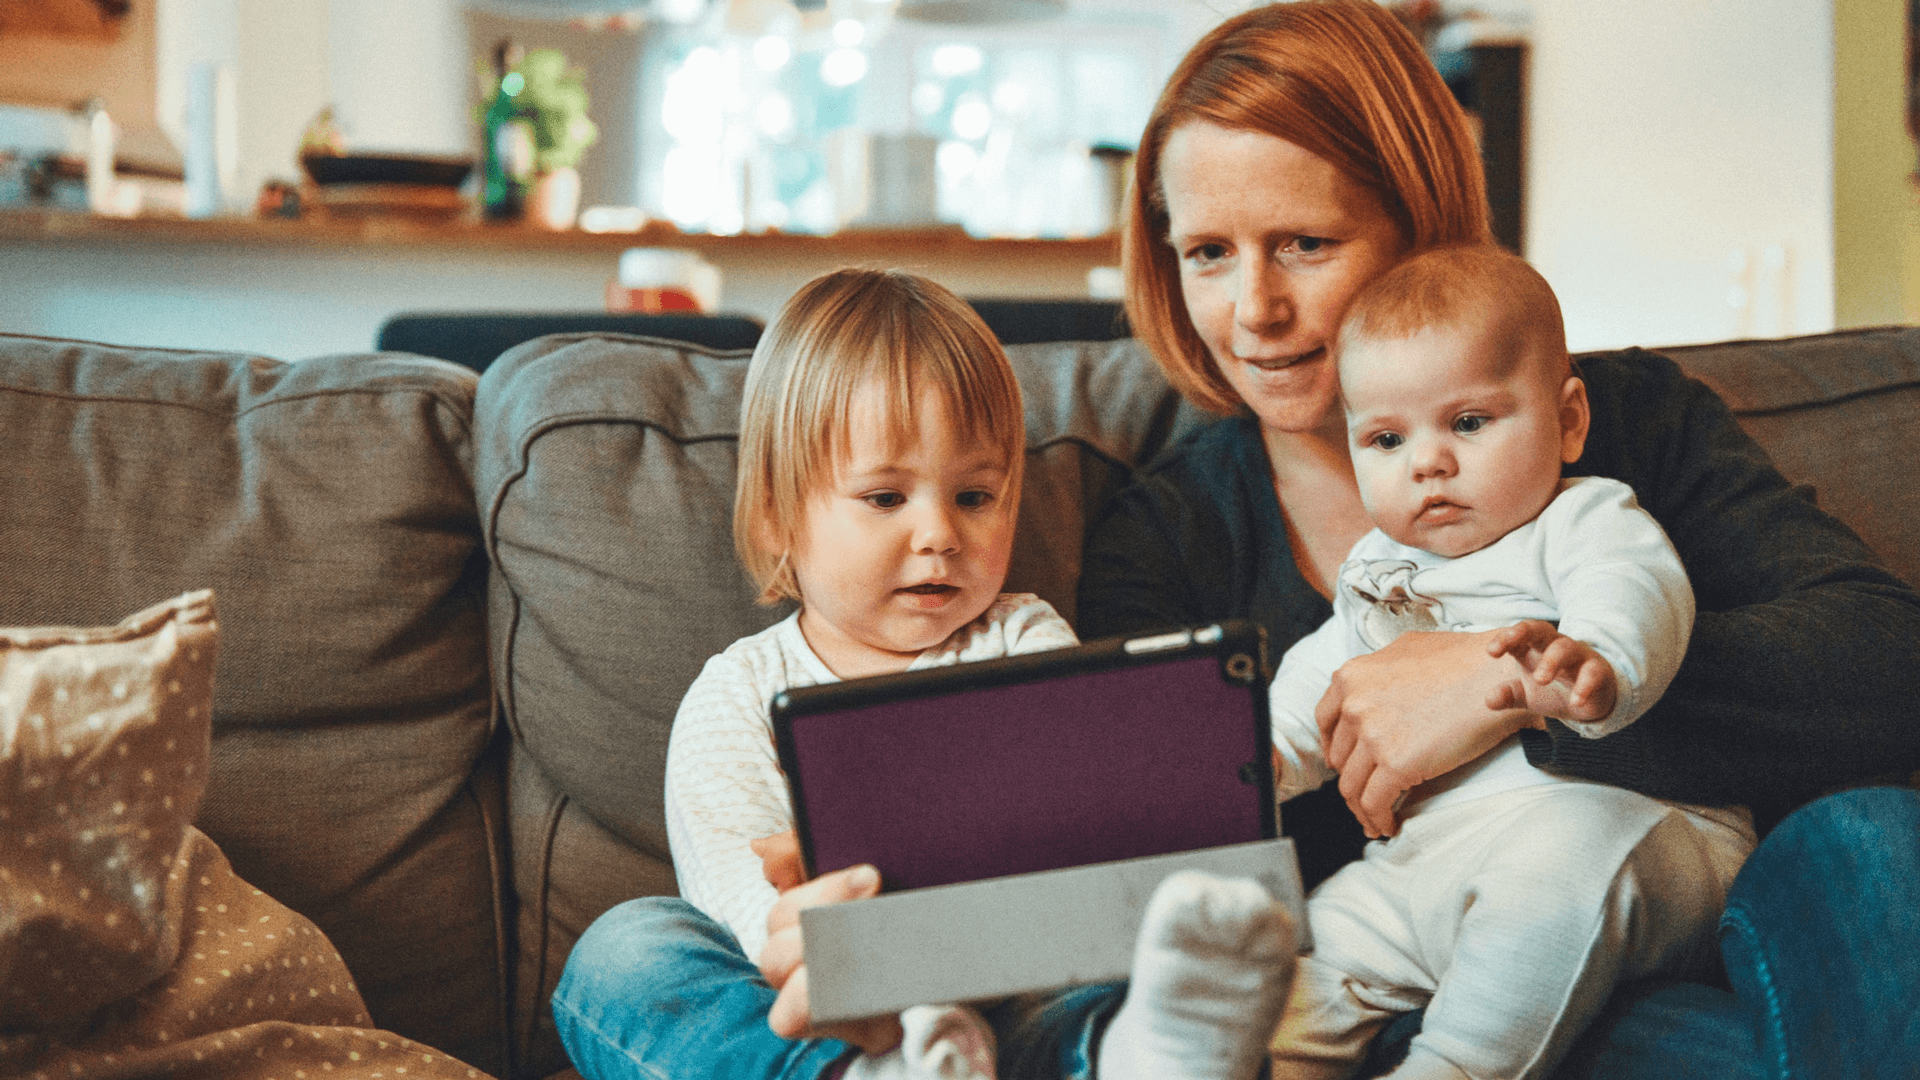 mom with two young children on her lap looking at a tablet